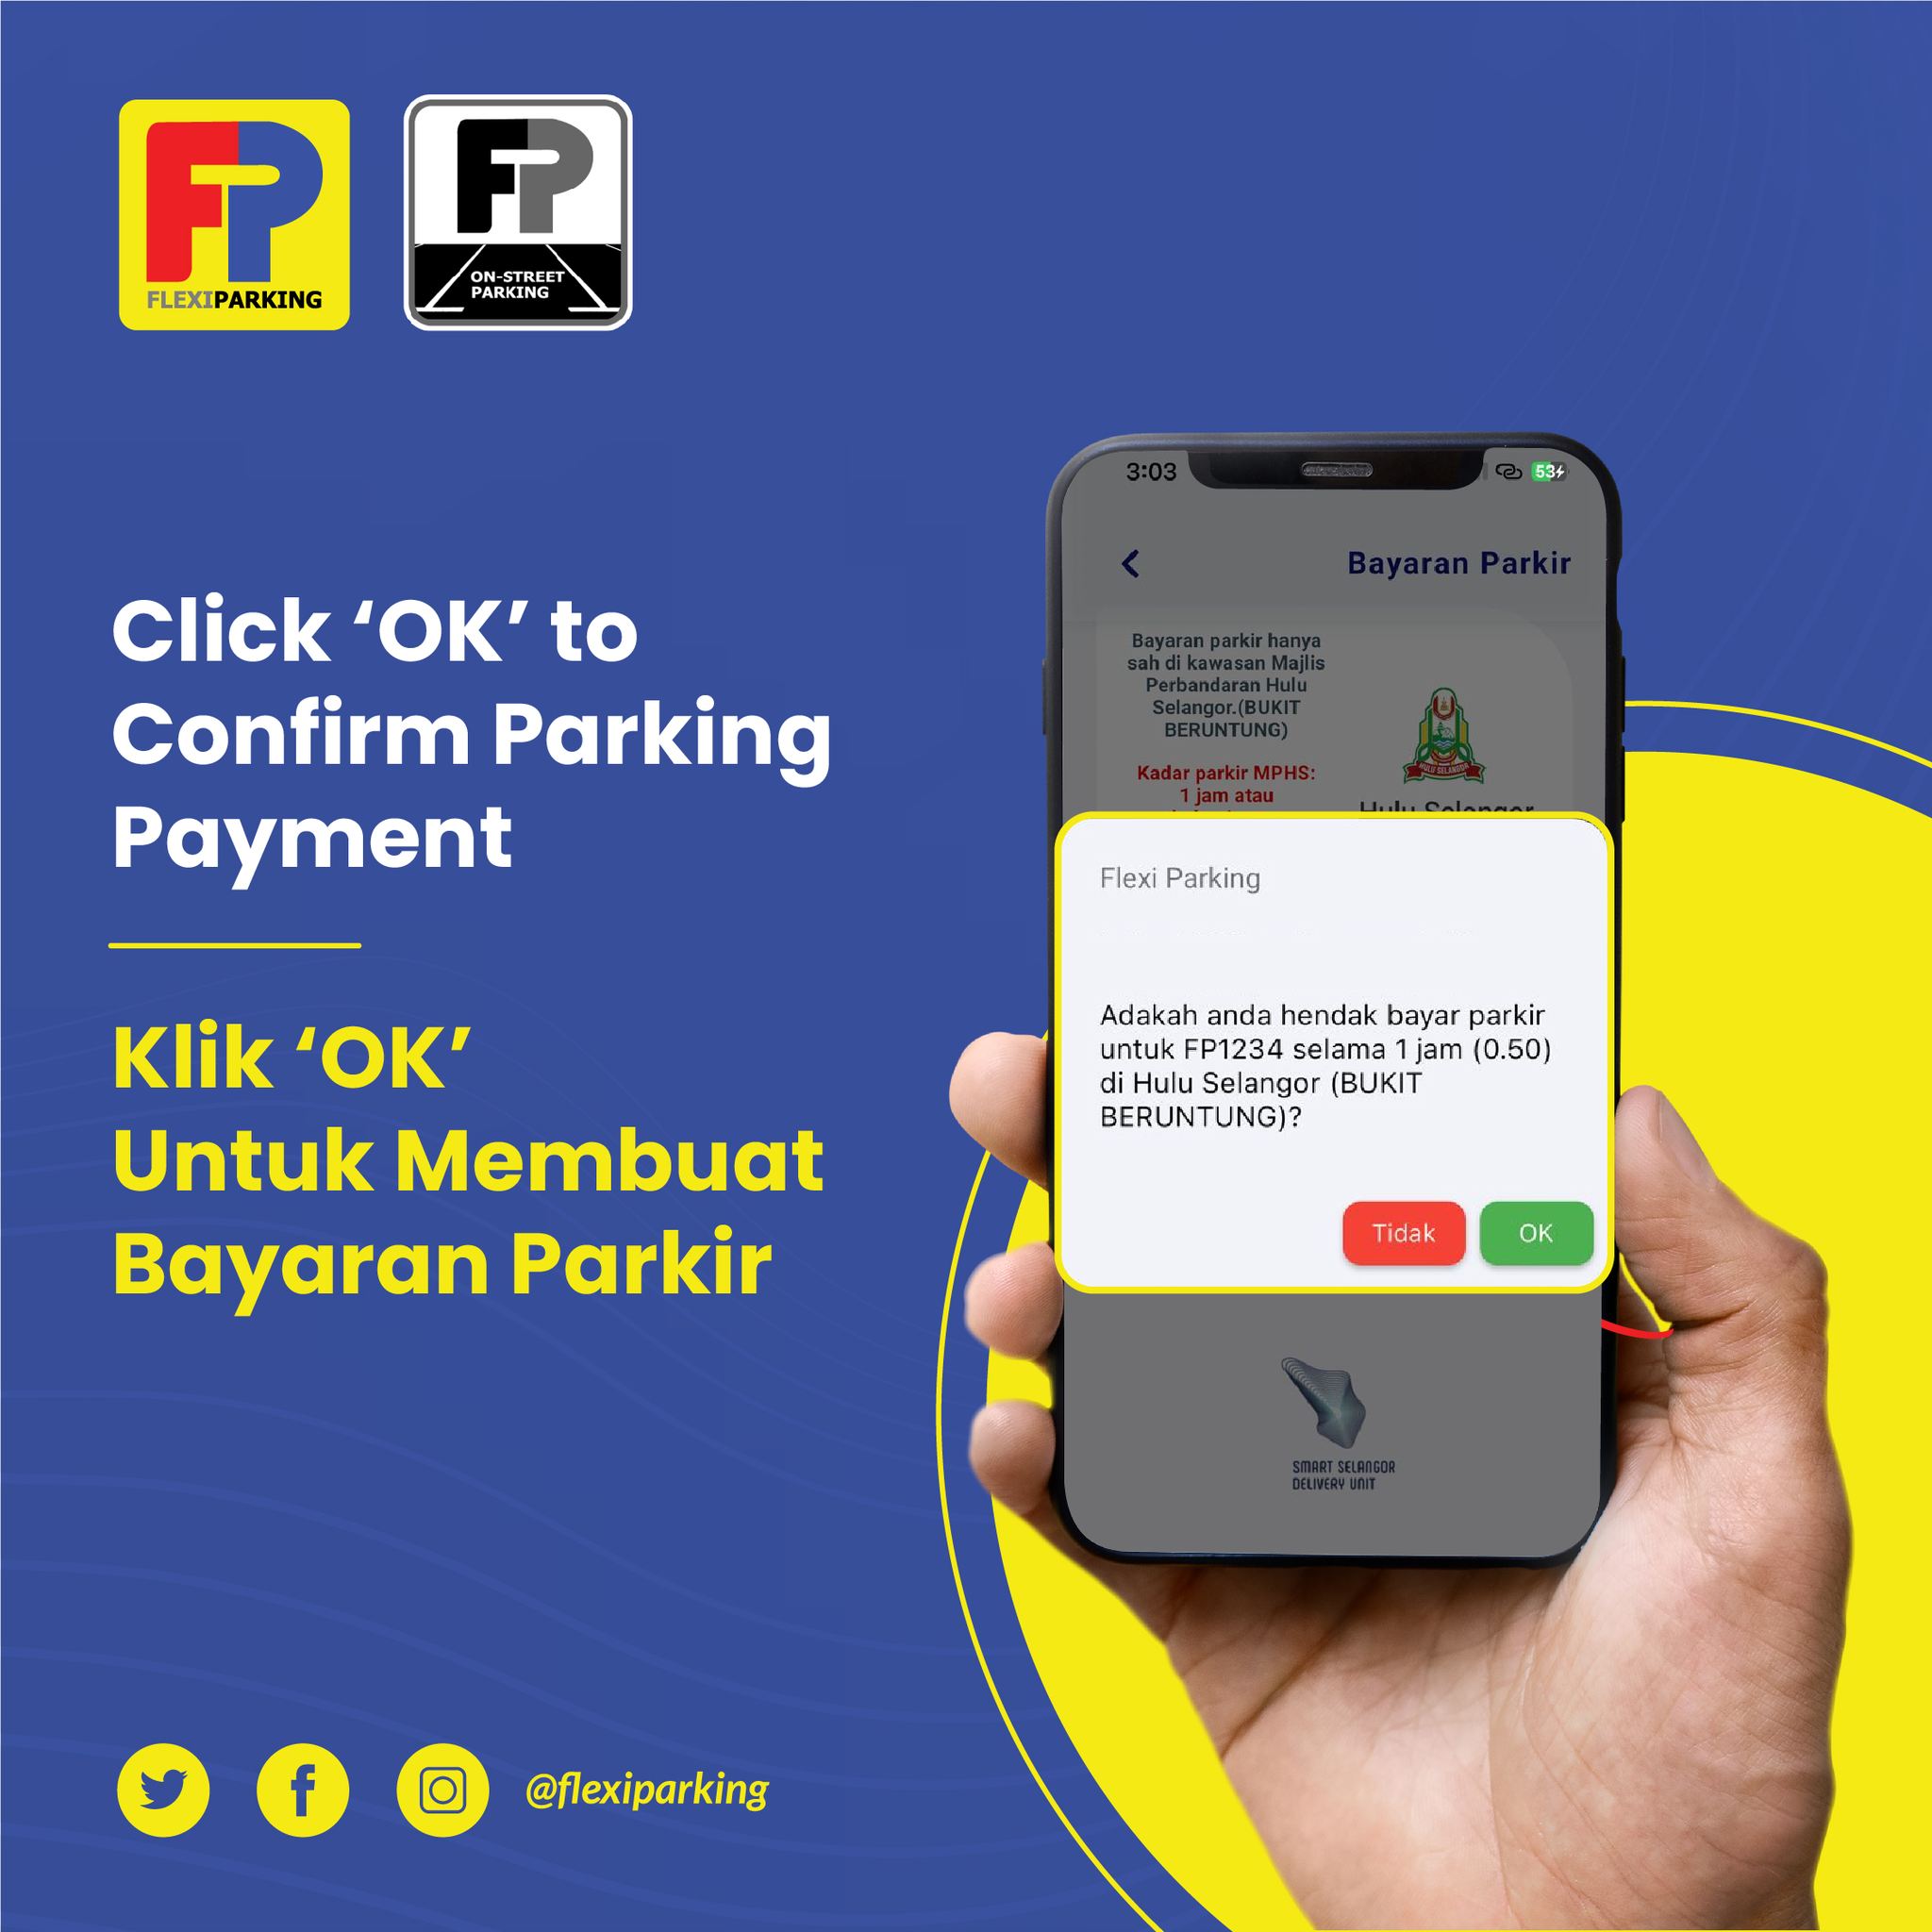 click okay to confirm payment for stress free parking on Flexi Parking!